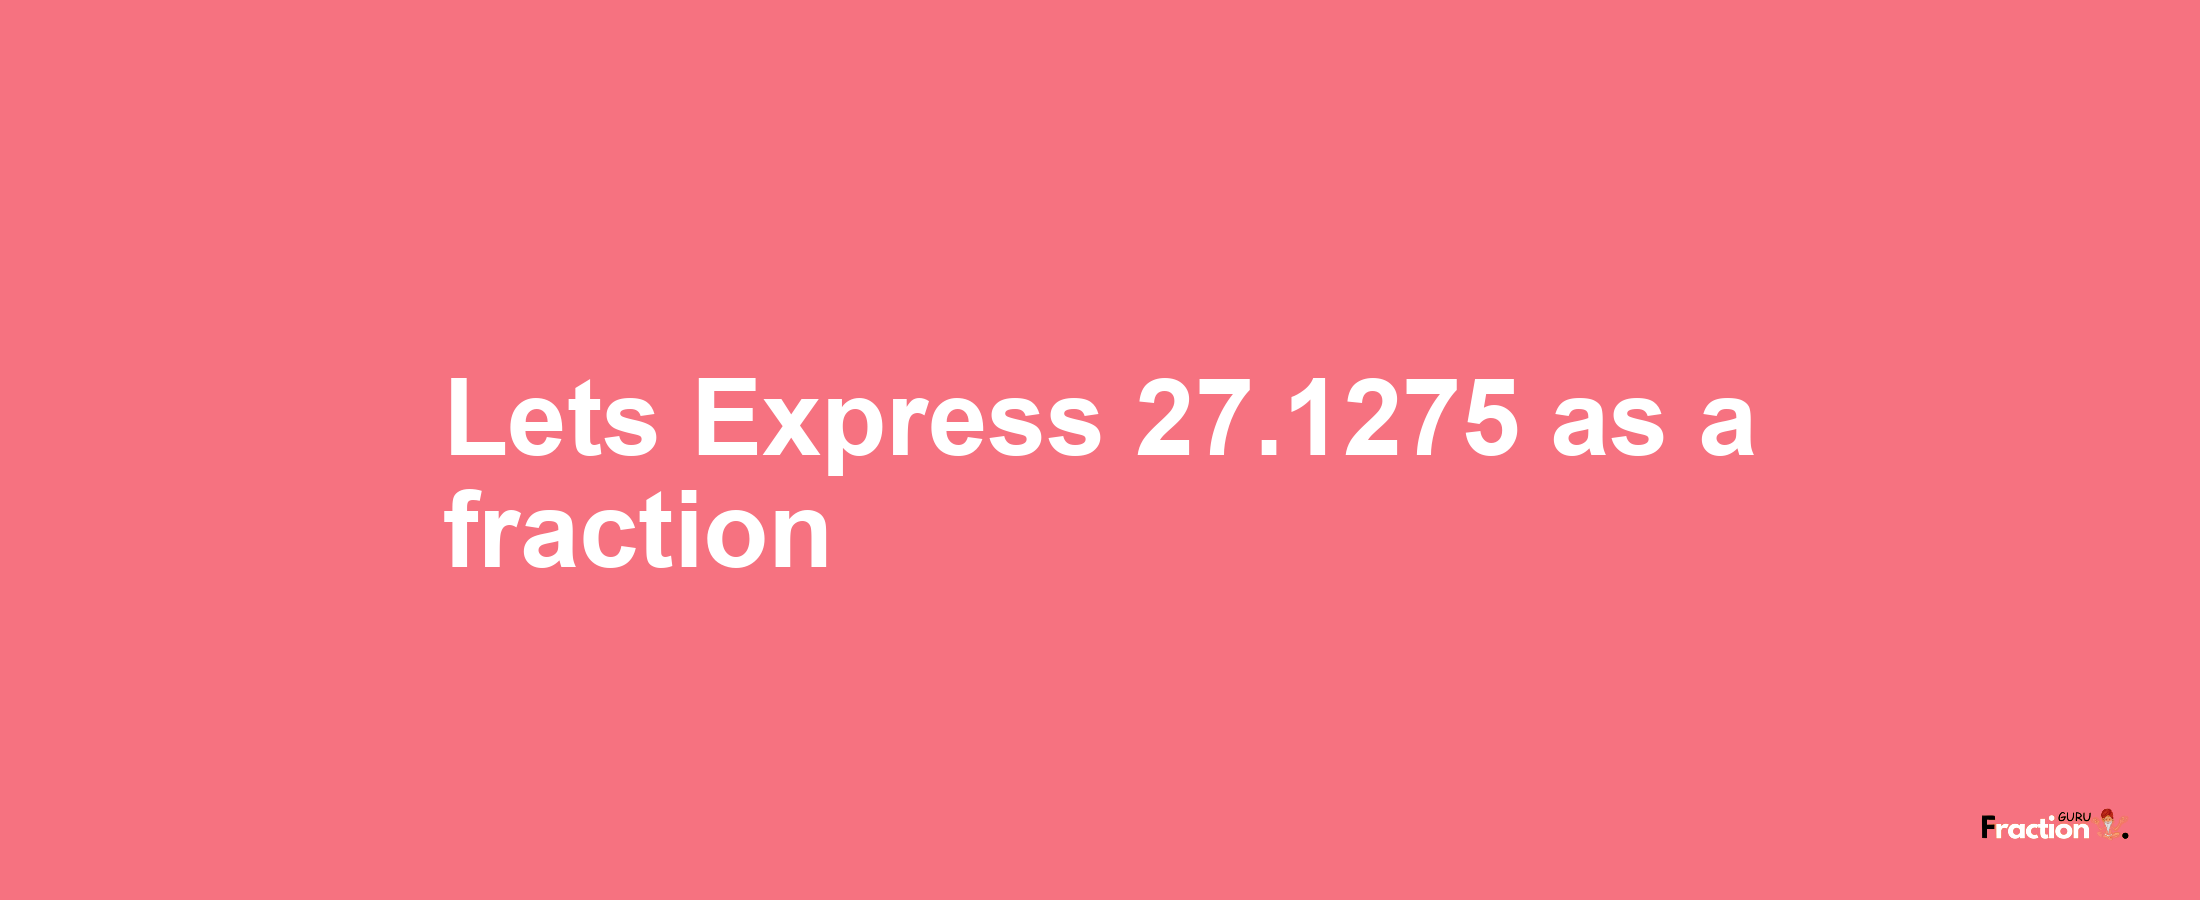 Lets Express 27.1275 as afraction